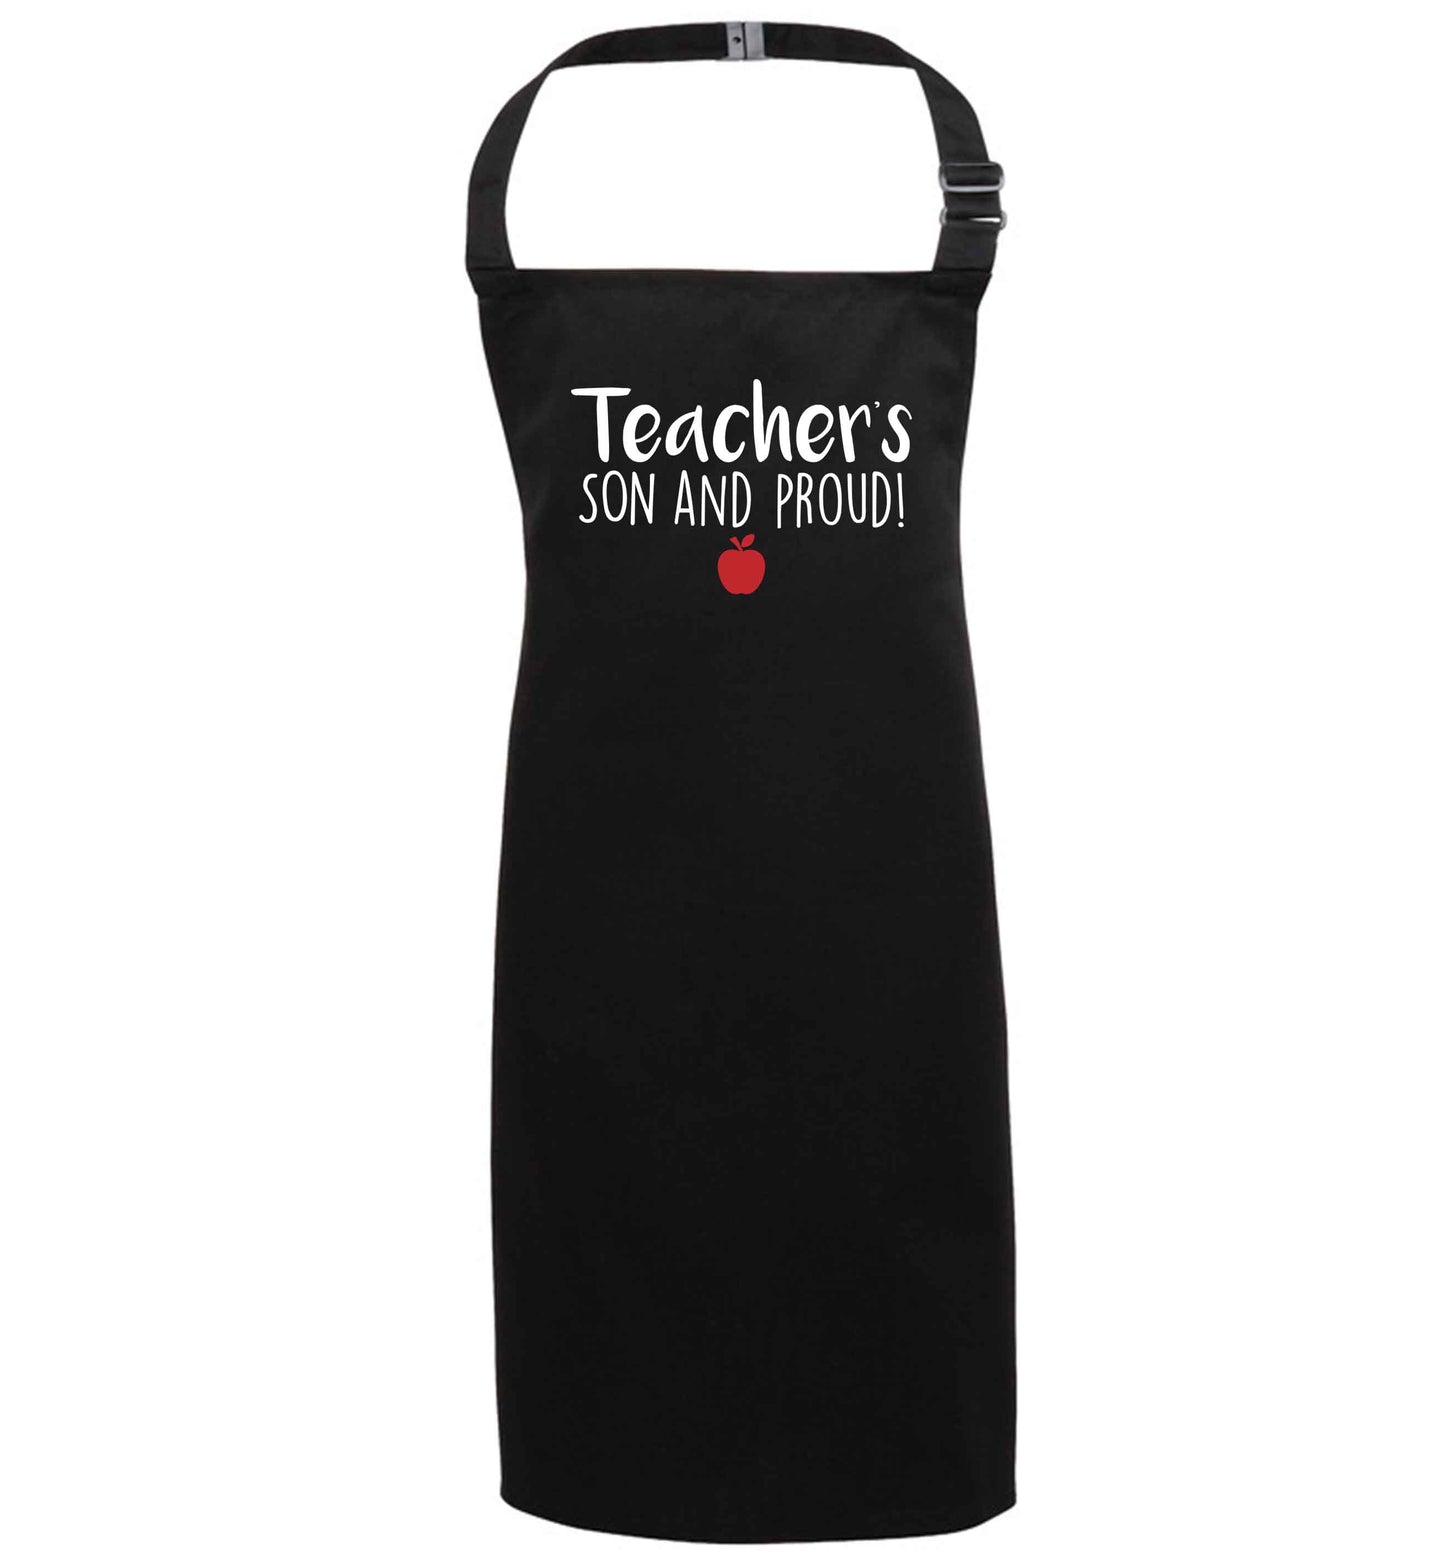 Teachers son and proud black apron 7-10 years